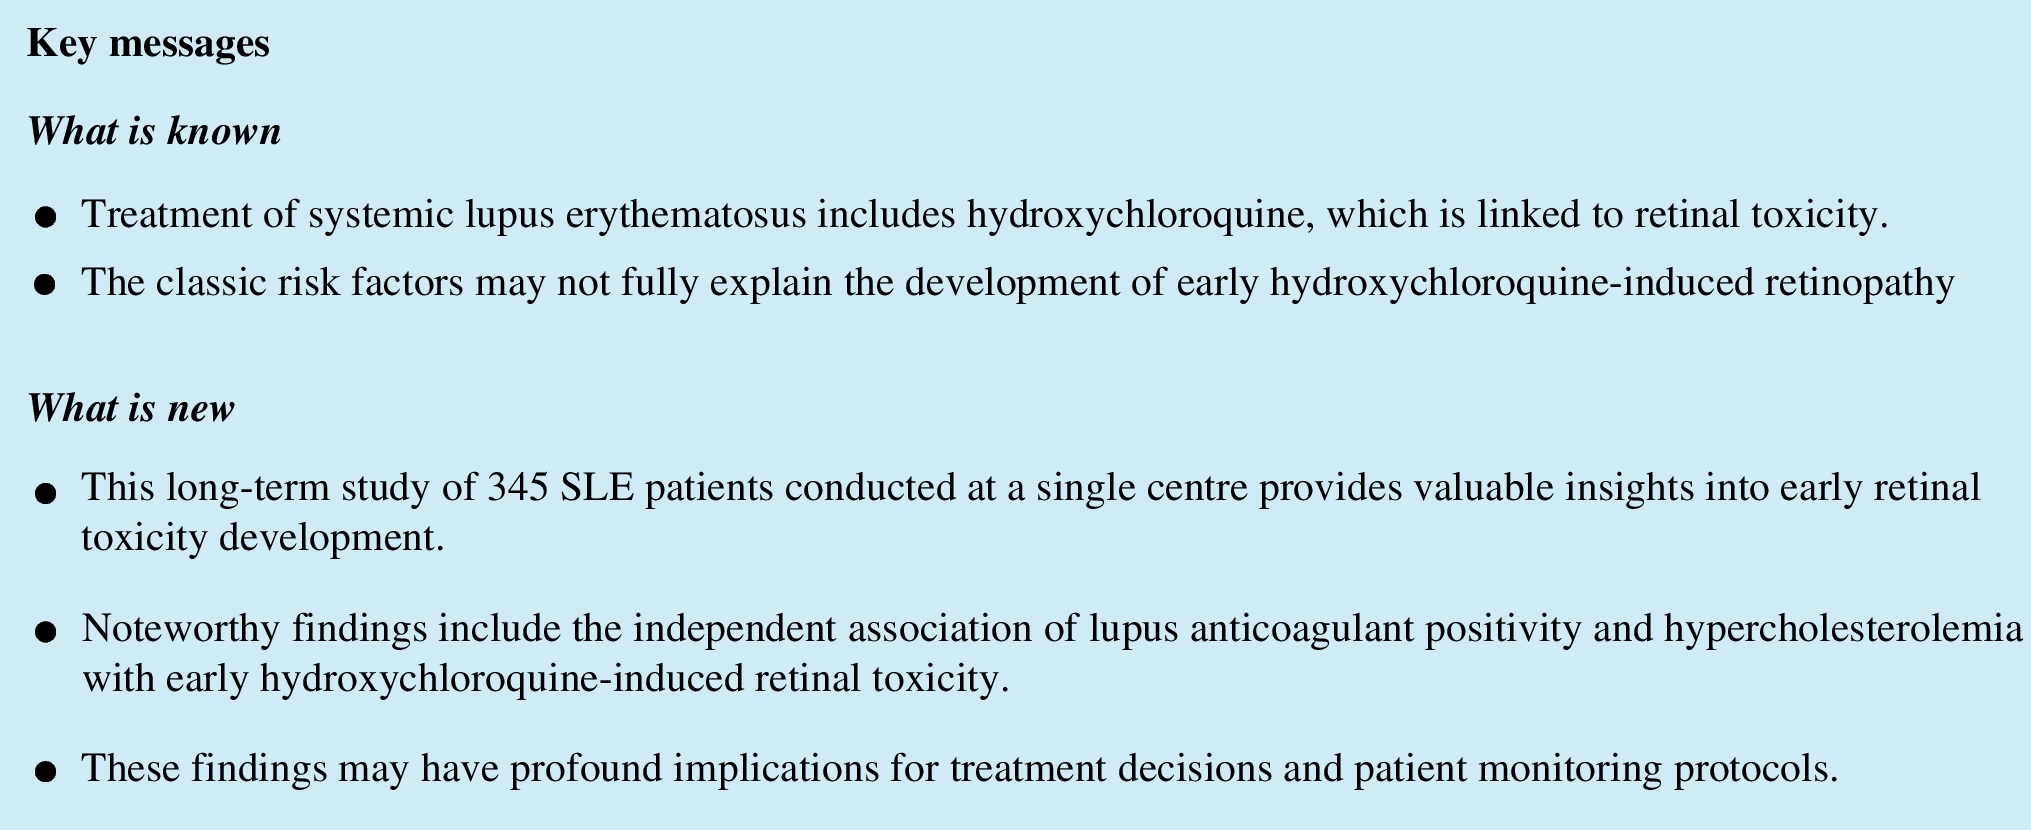 Factors associated with early hydroxychloroquine-induced retinal toxicity in patients with systemic lupus erythematosus